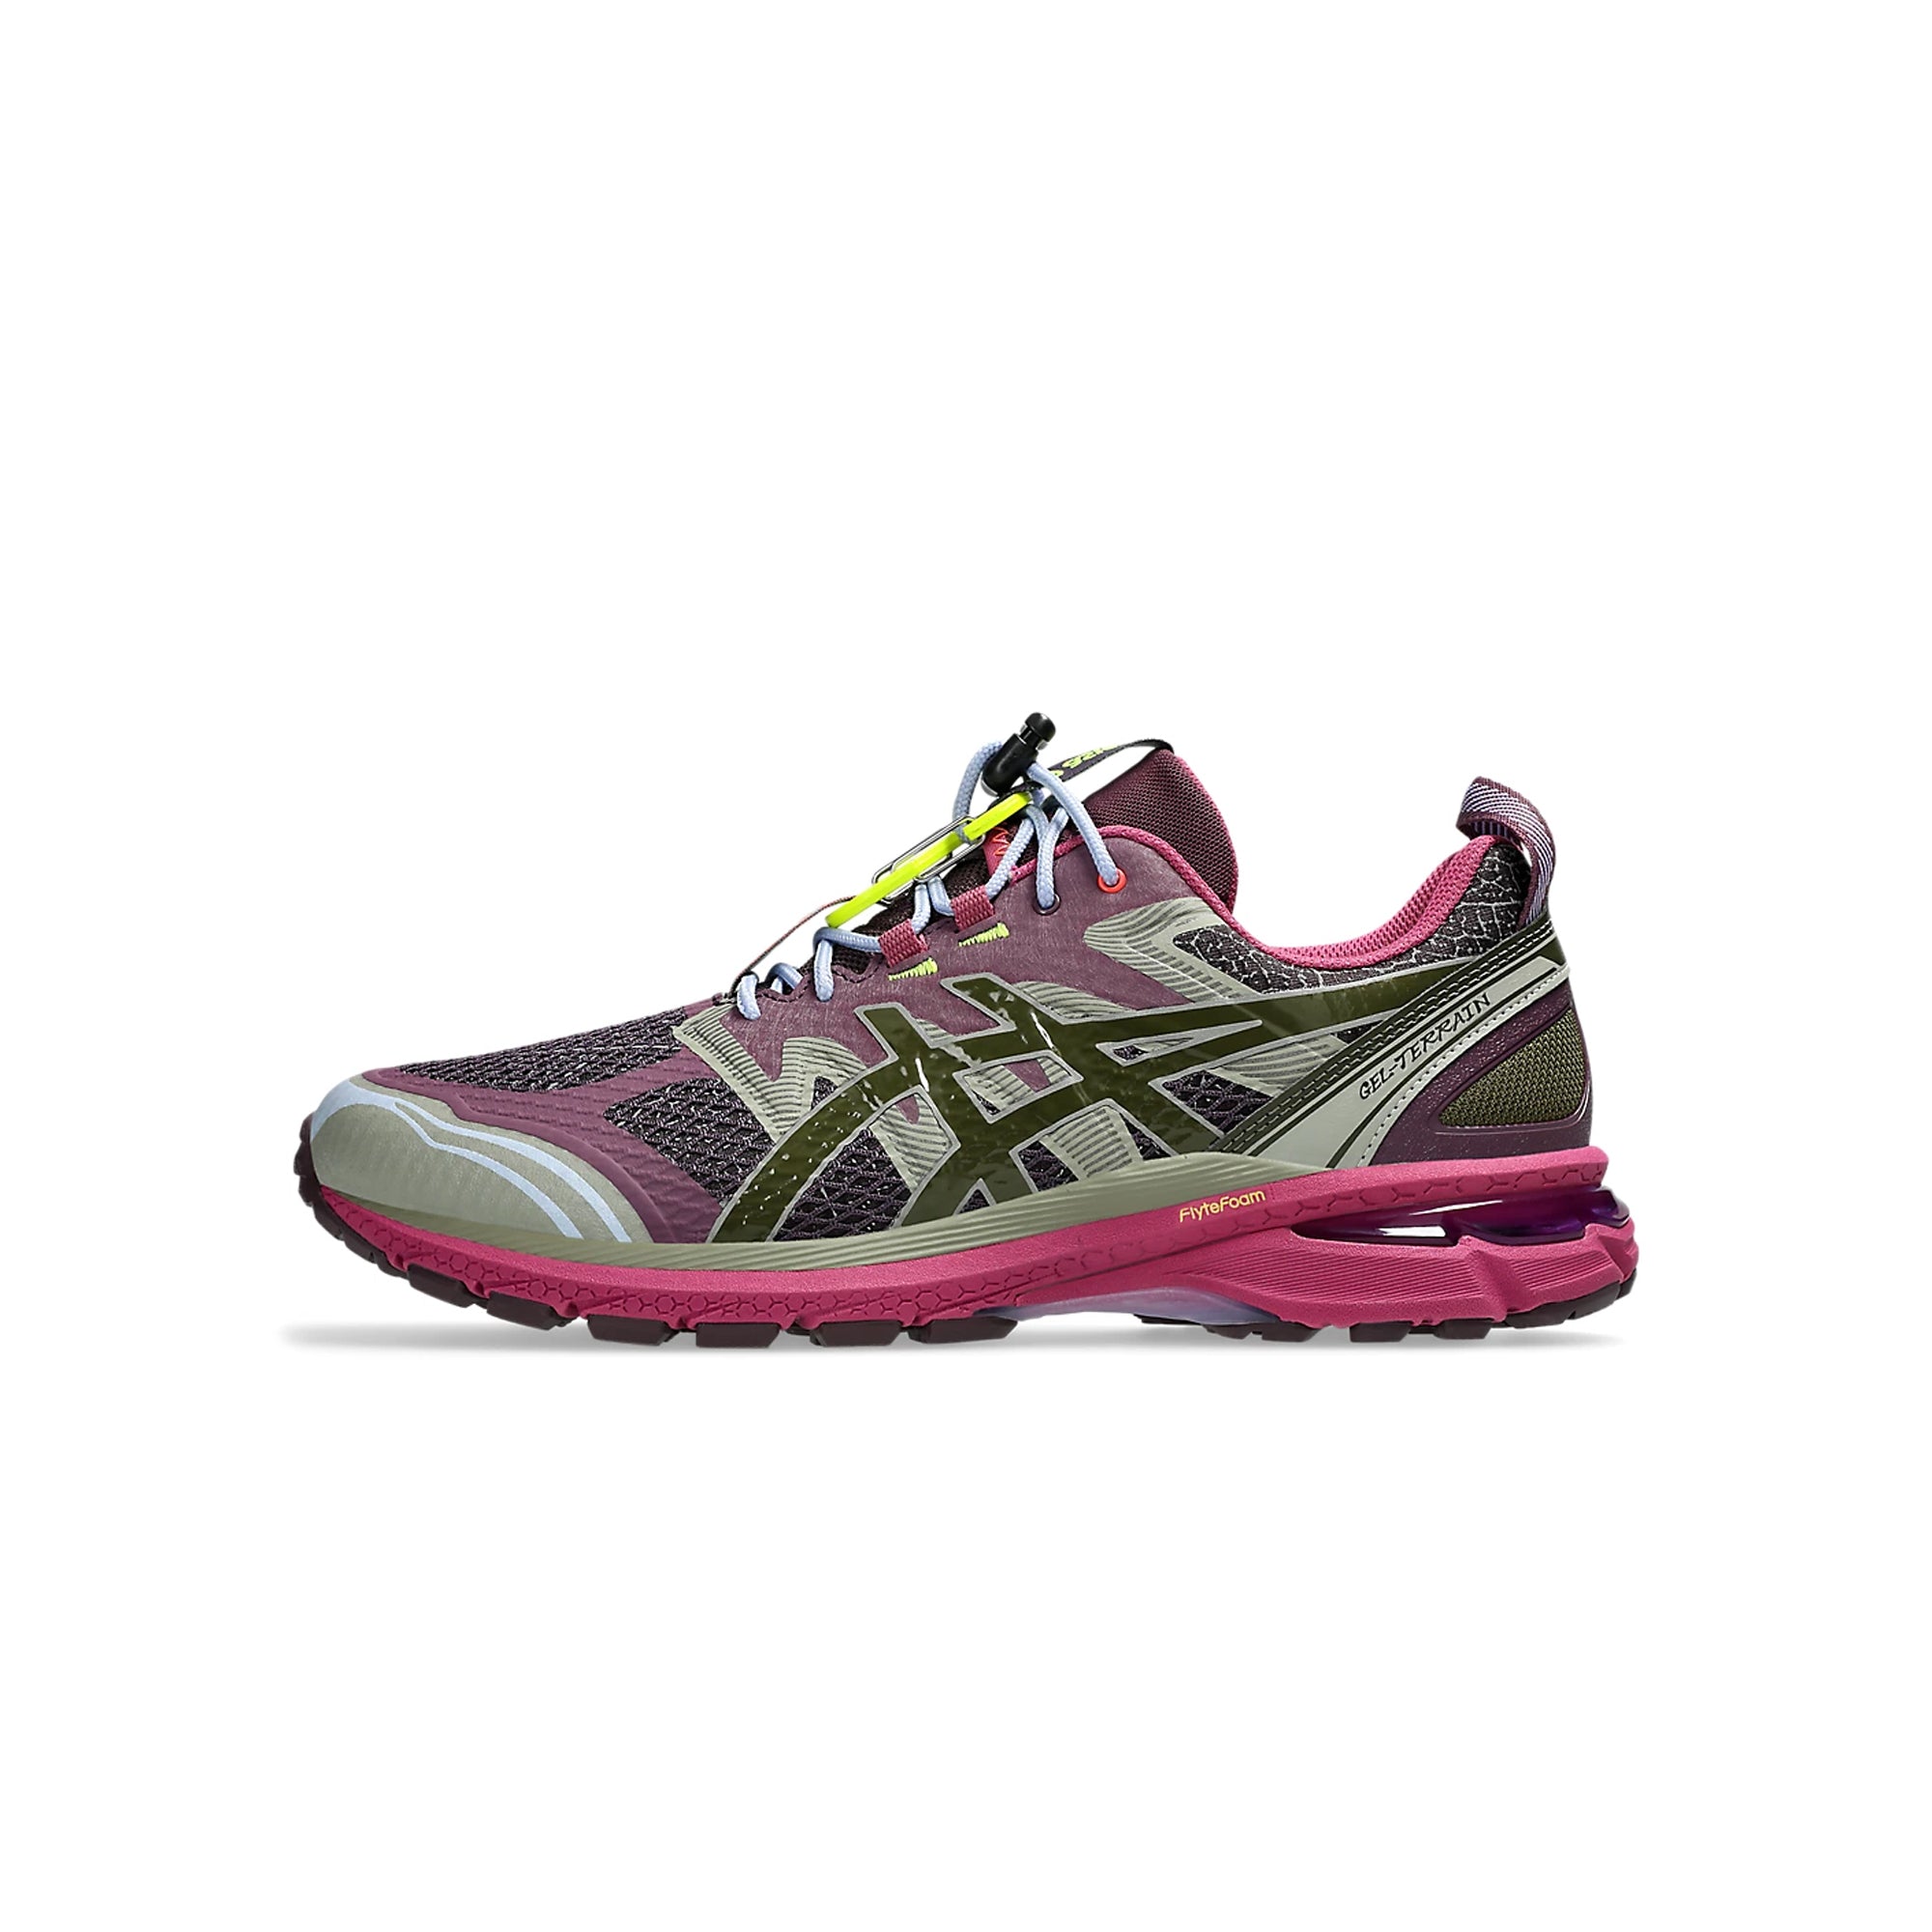 Asics x UP THERE Mens Gel-Terrain Shoes card image